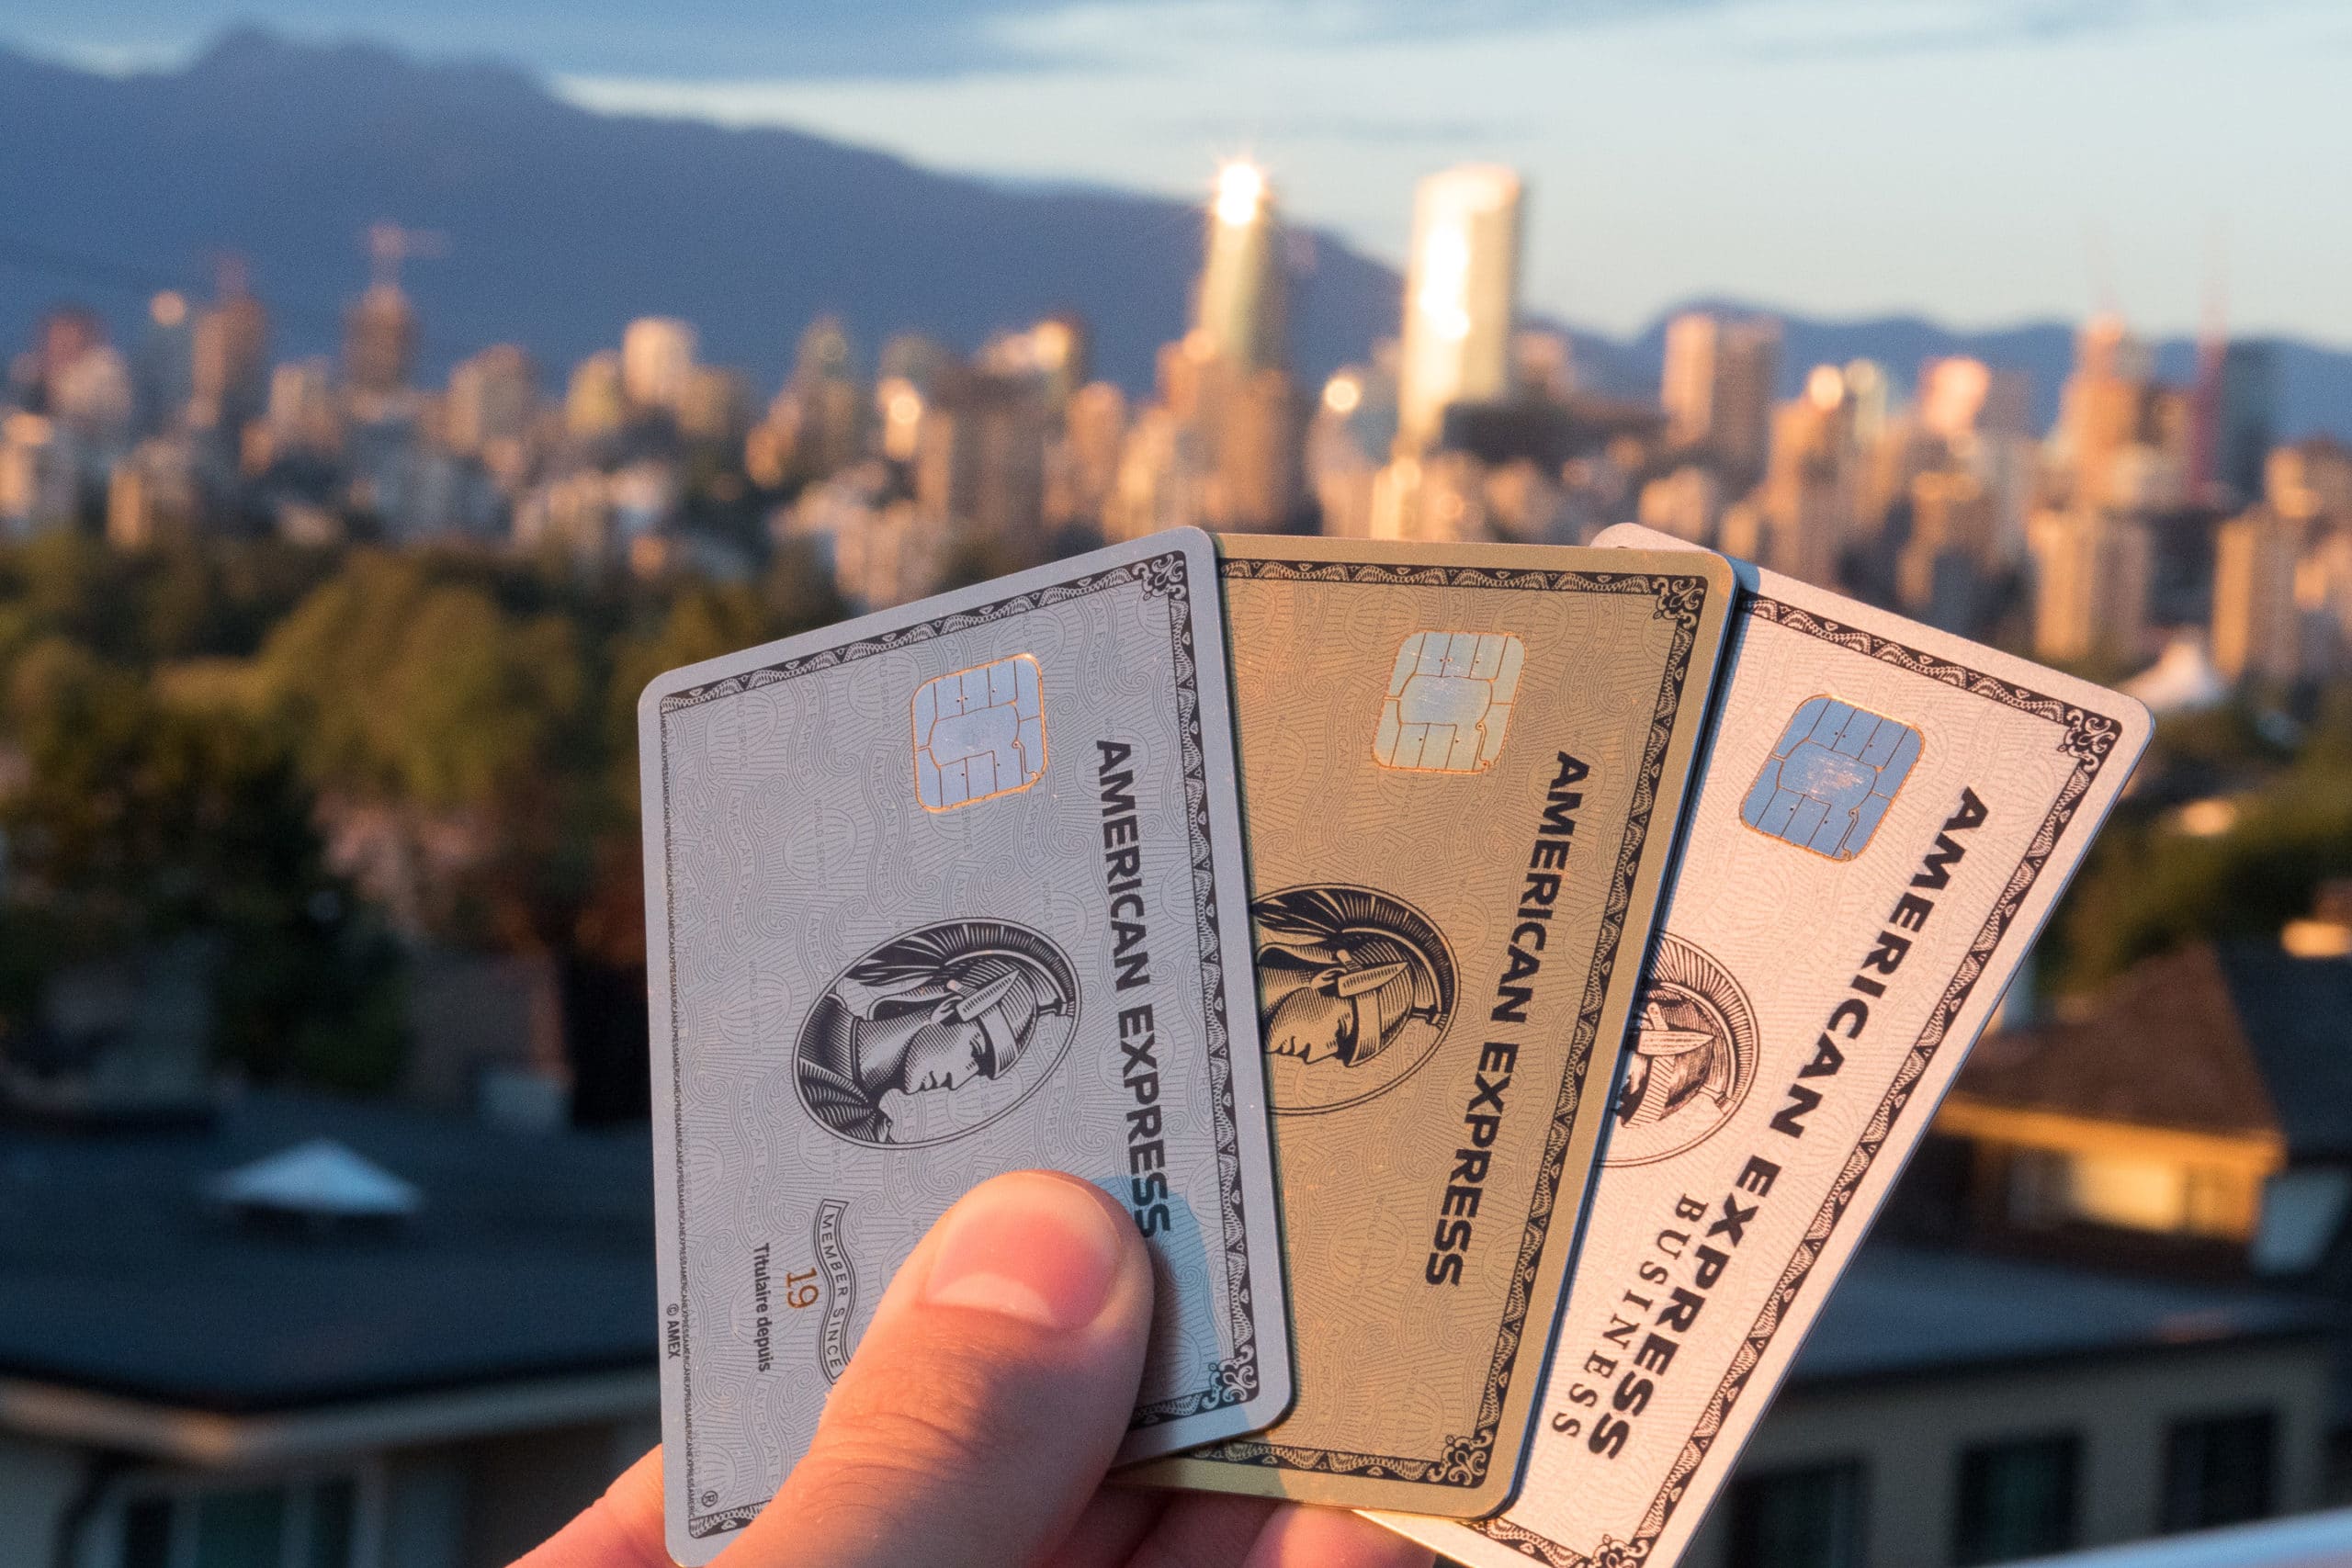 Amex Membership Rewards Cards: New Offers for Summer 2022 (120,000 Points!)